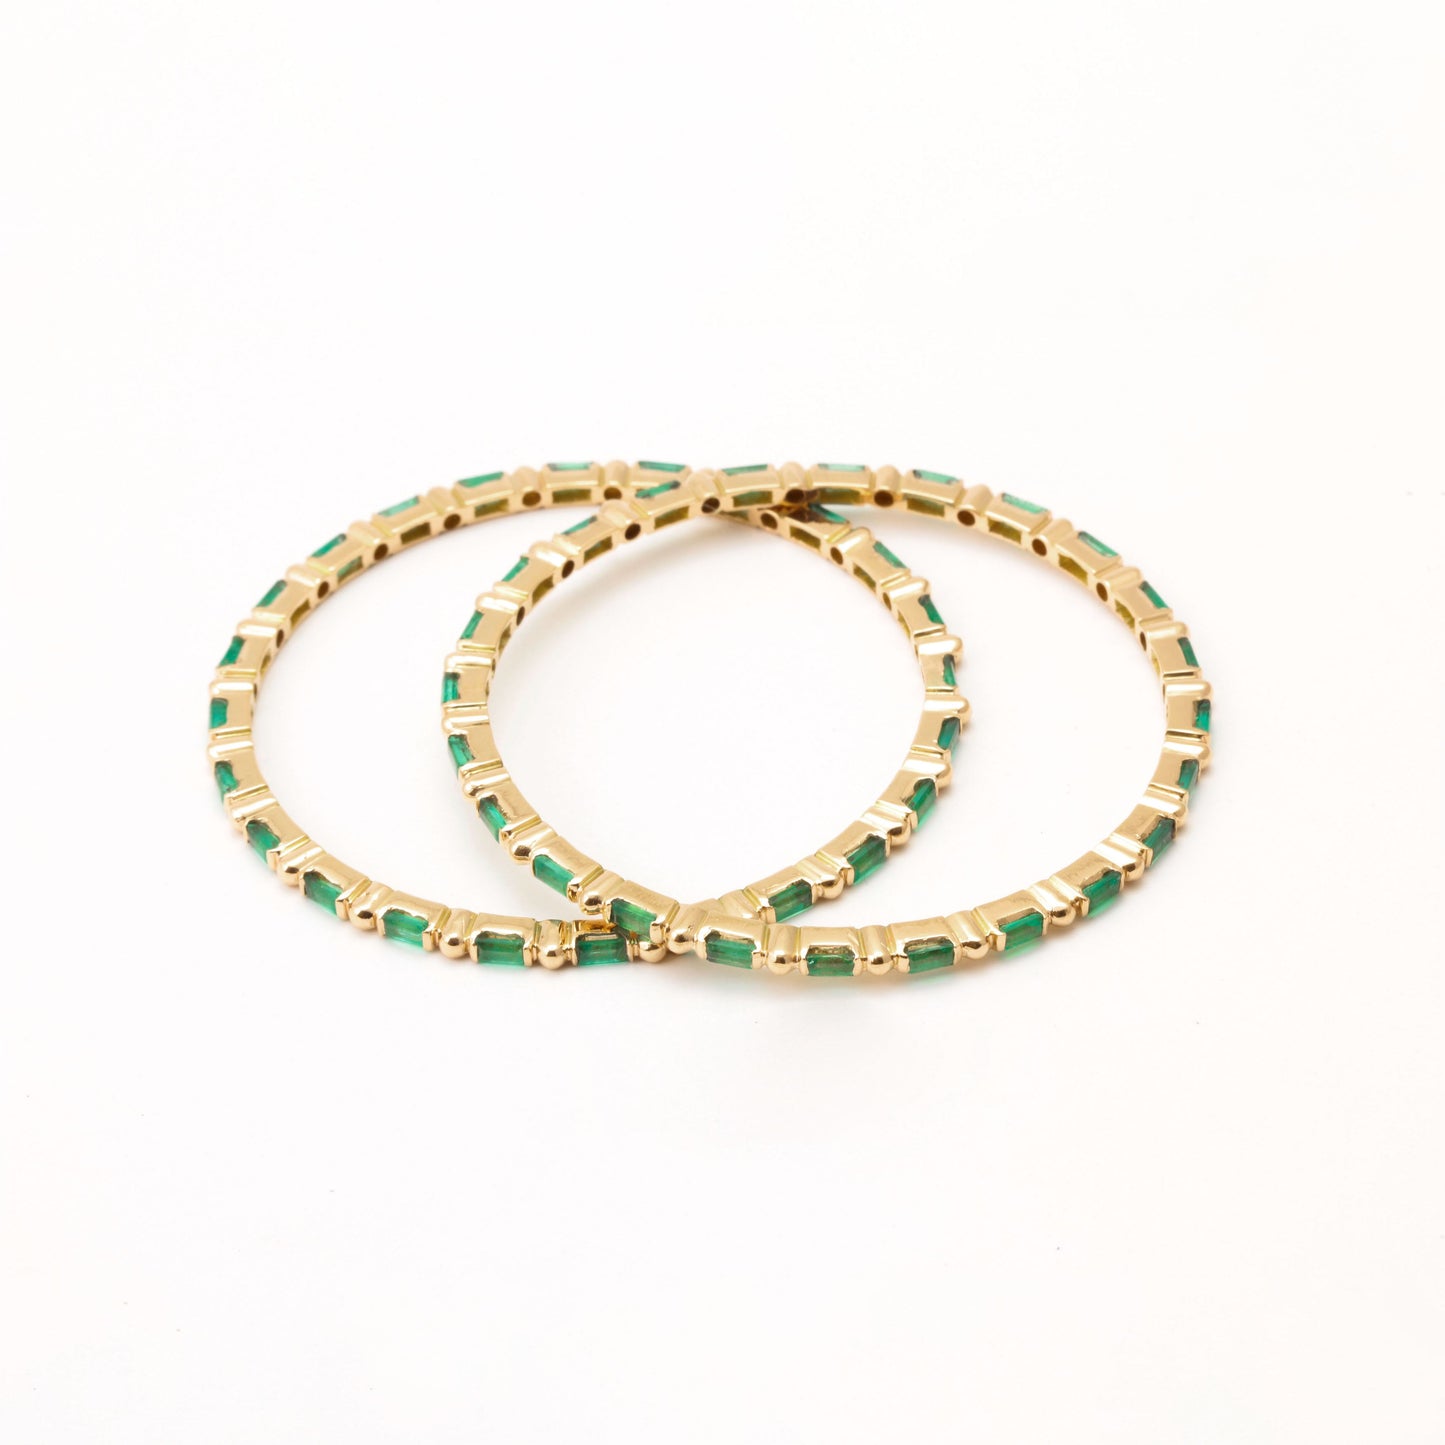 The Abi Gold and Emerald Bangle by Rasvihar